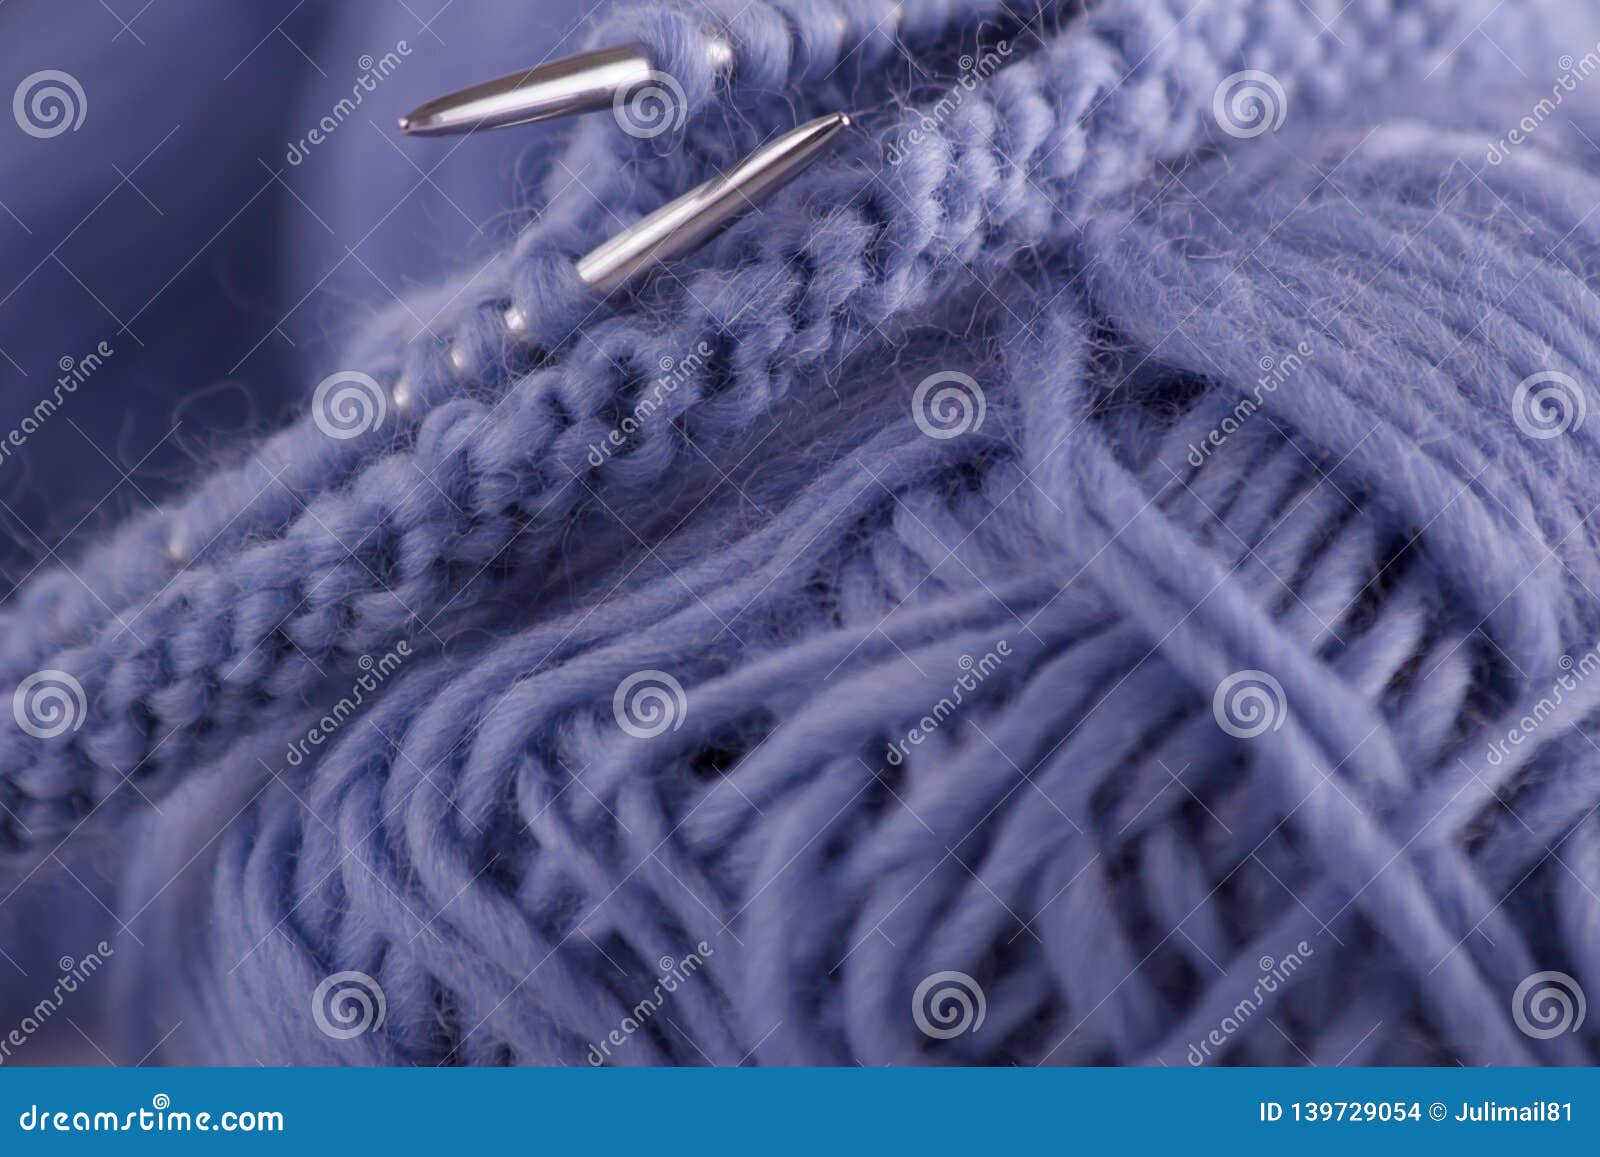 Close-up on the Balls of Blue Knitting Yarn, Knitting Needles and ...